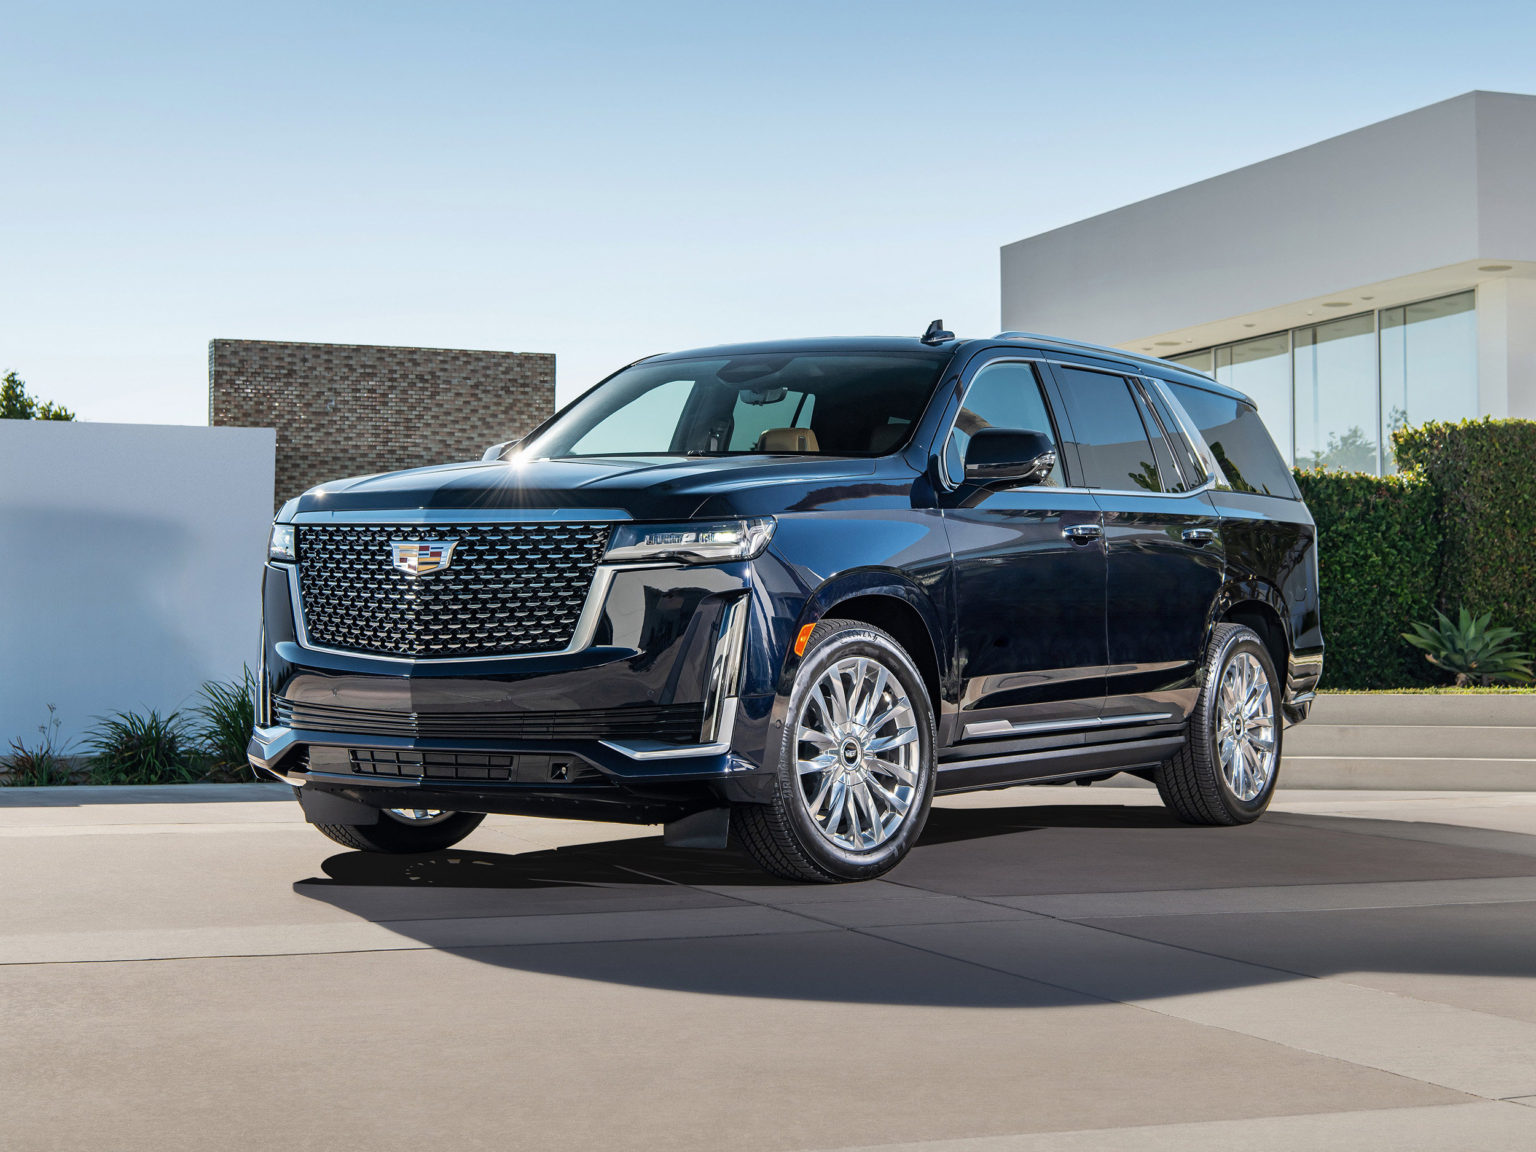 The Cadillac Escalade is one of the most luxurious SUVs you can buy.